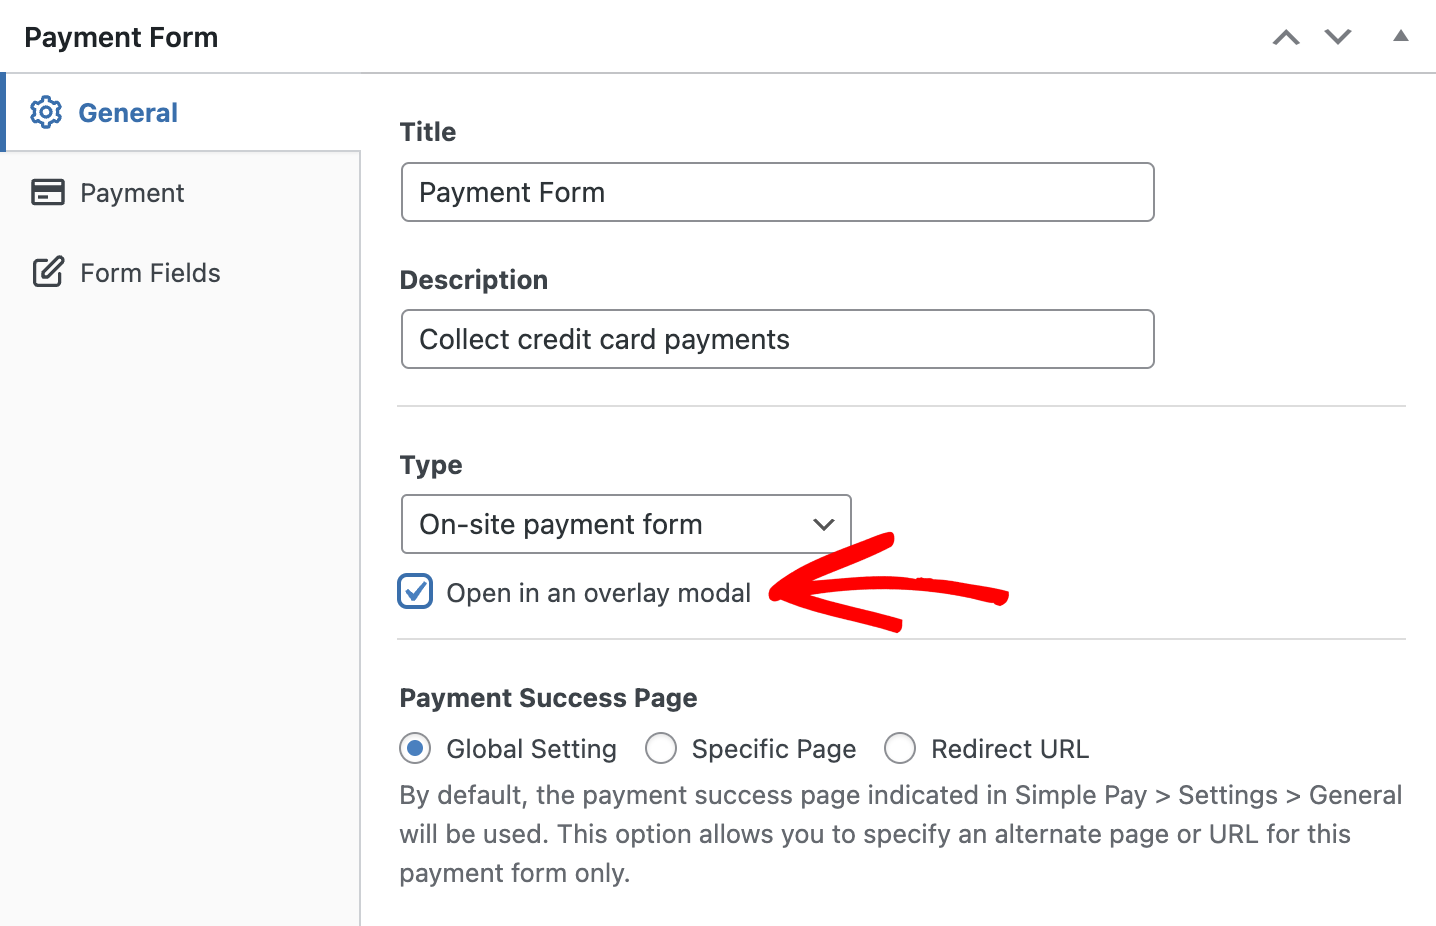 Choose to open the form in overlay modal